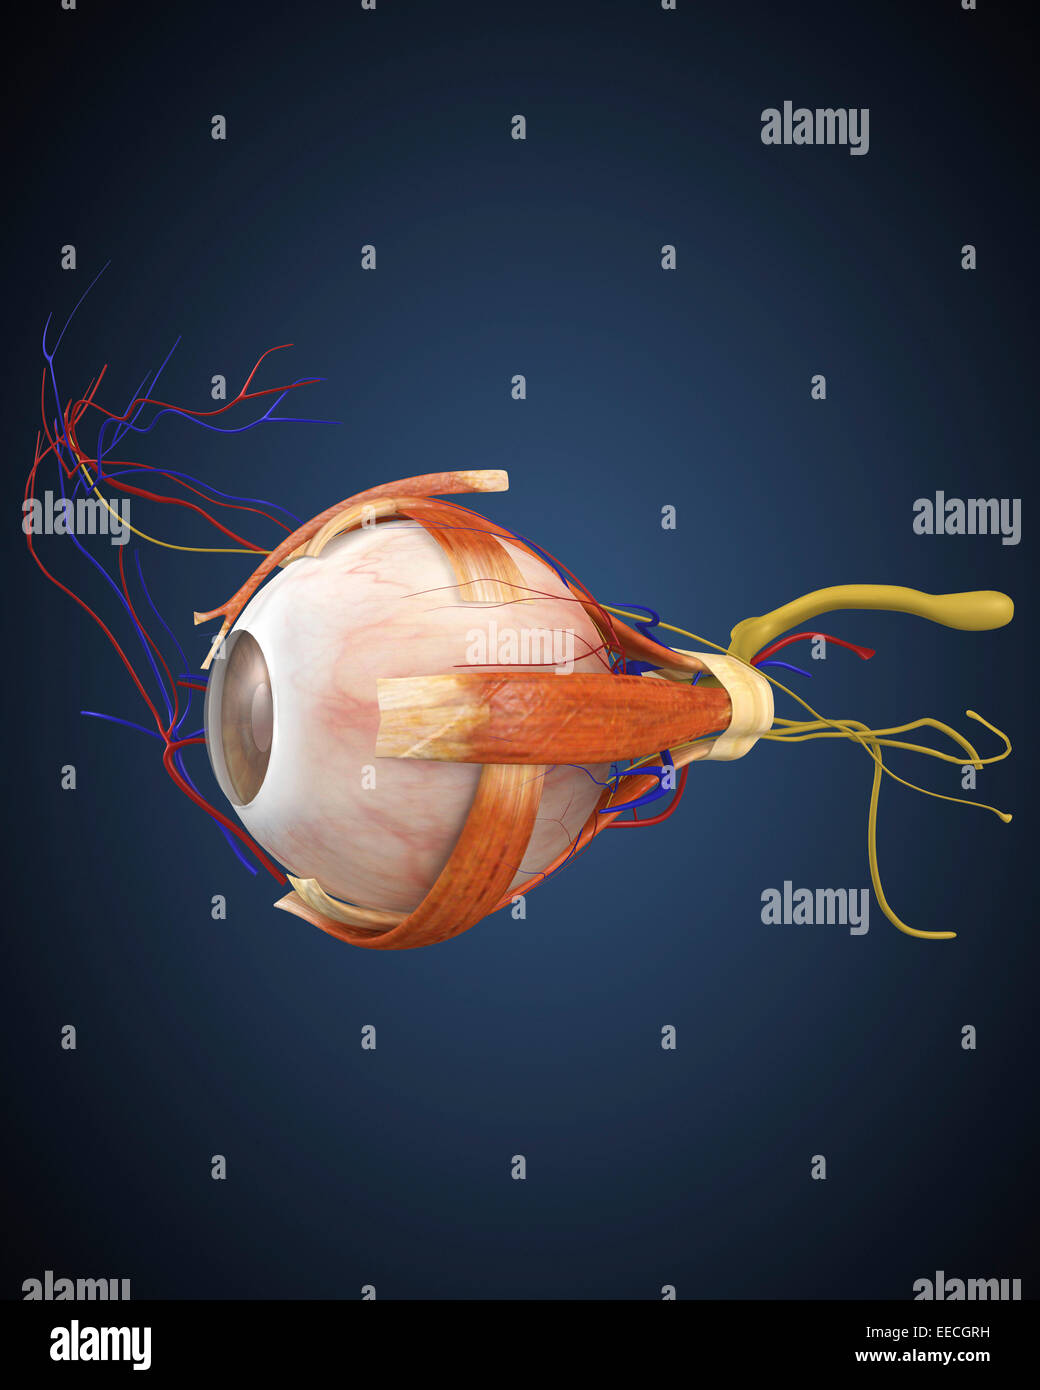 Human eye with muscles and circulatory system. Stock Photo